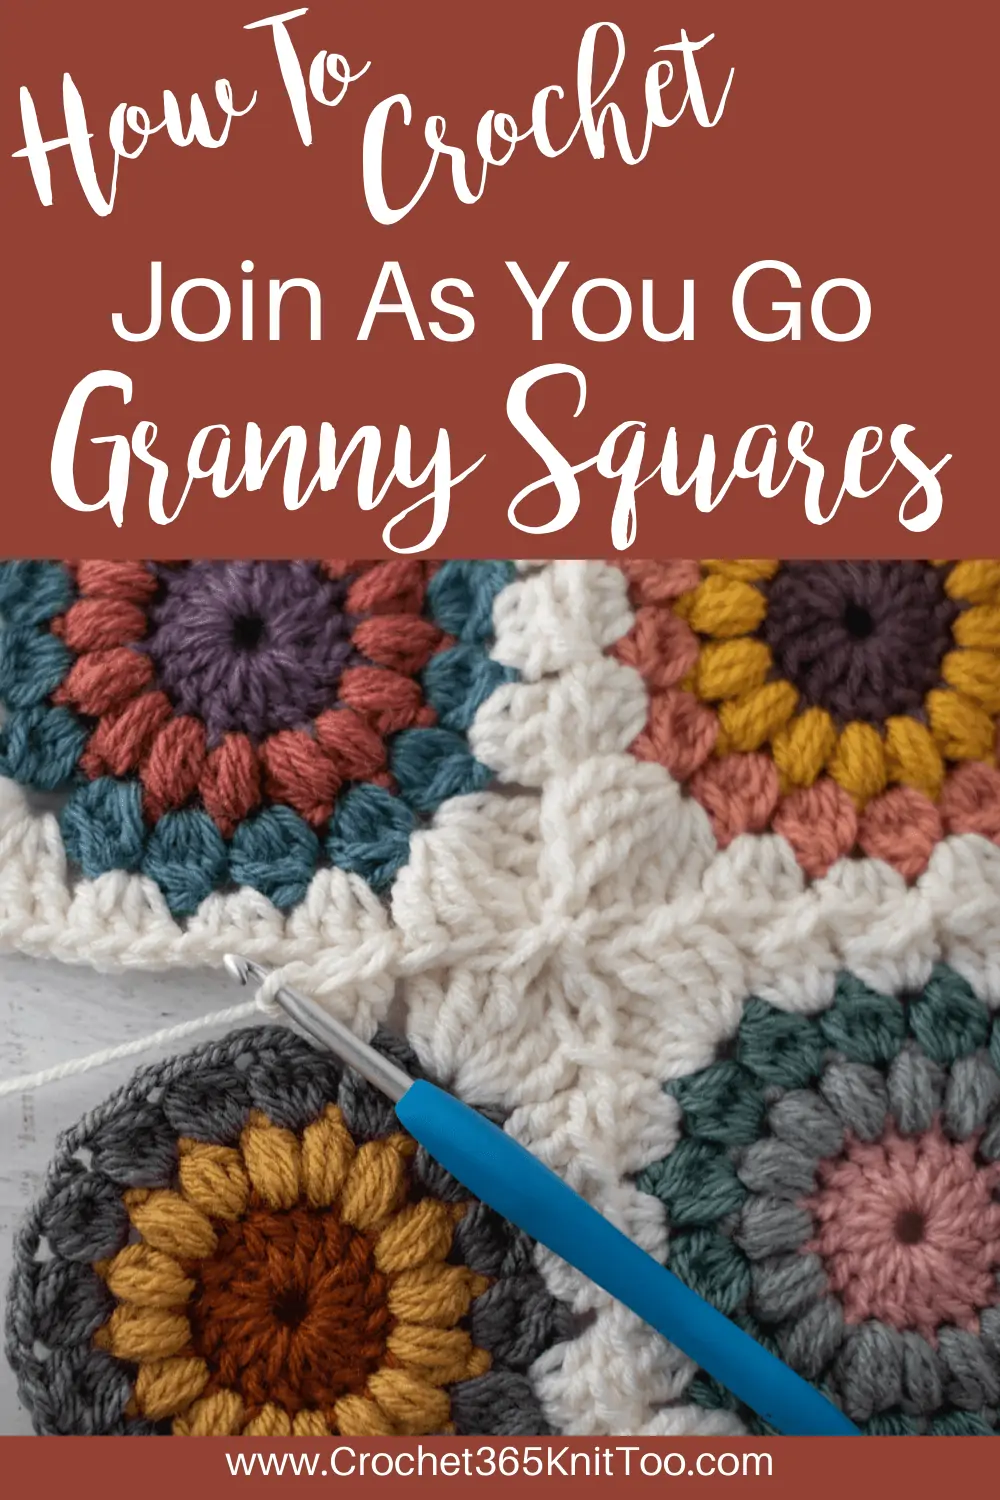 Graphic of Joining crochet afghan squares with blue crochet hook